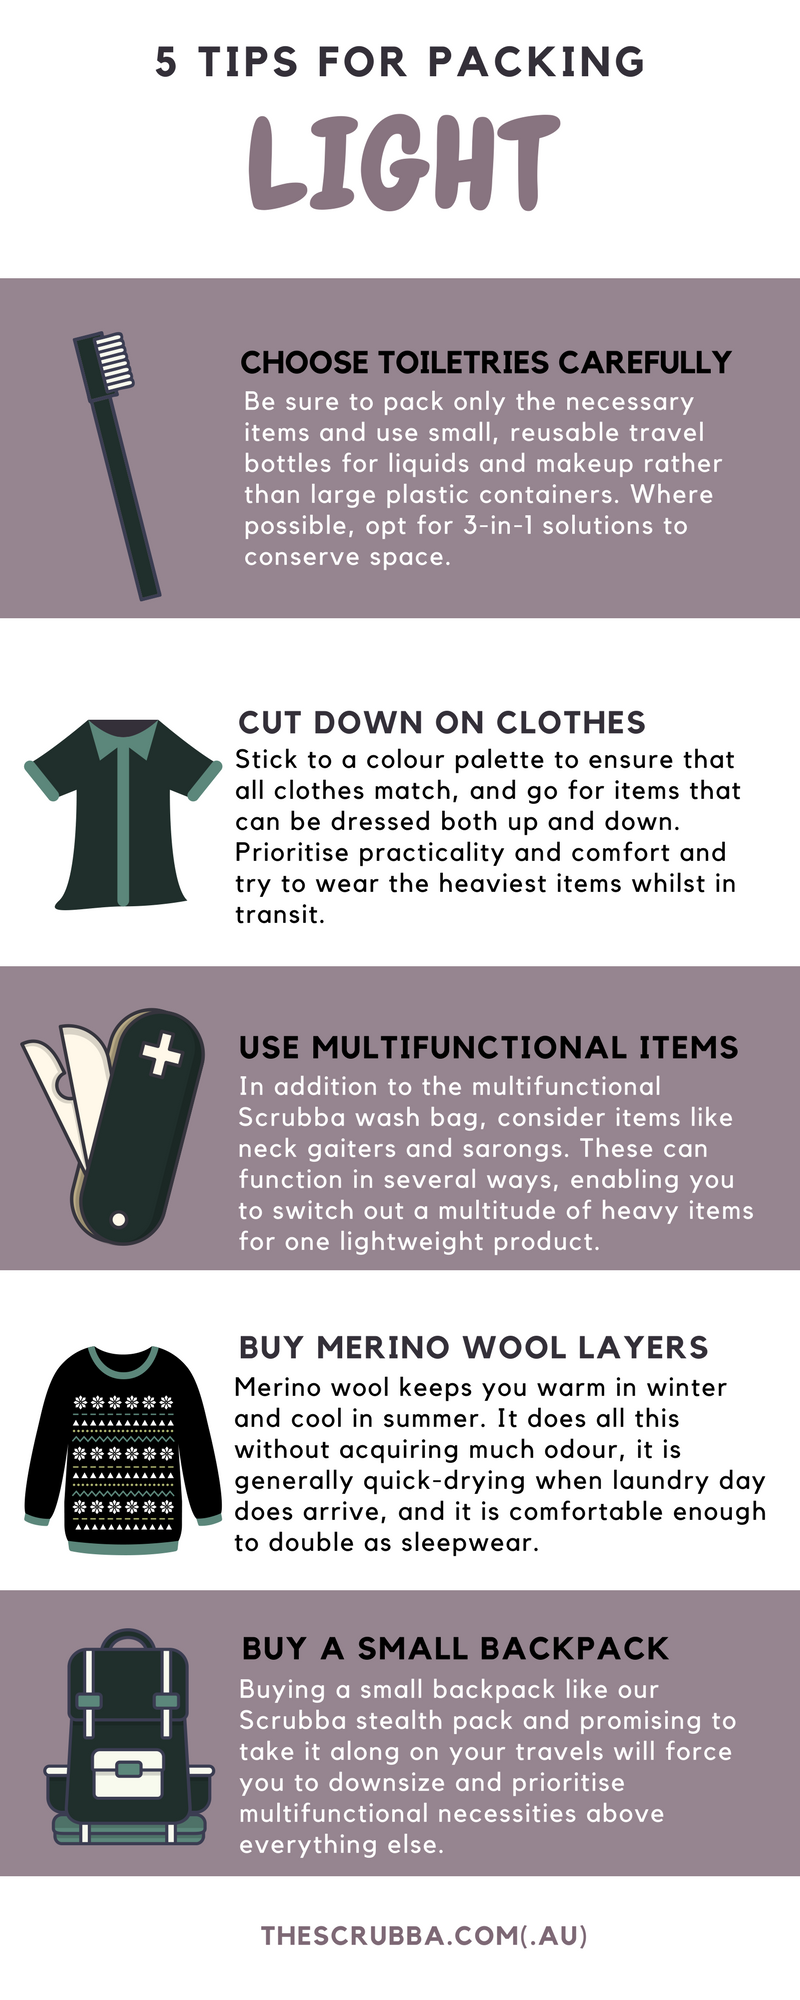 5 Tips for Packing Light Infographic